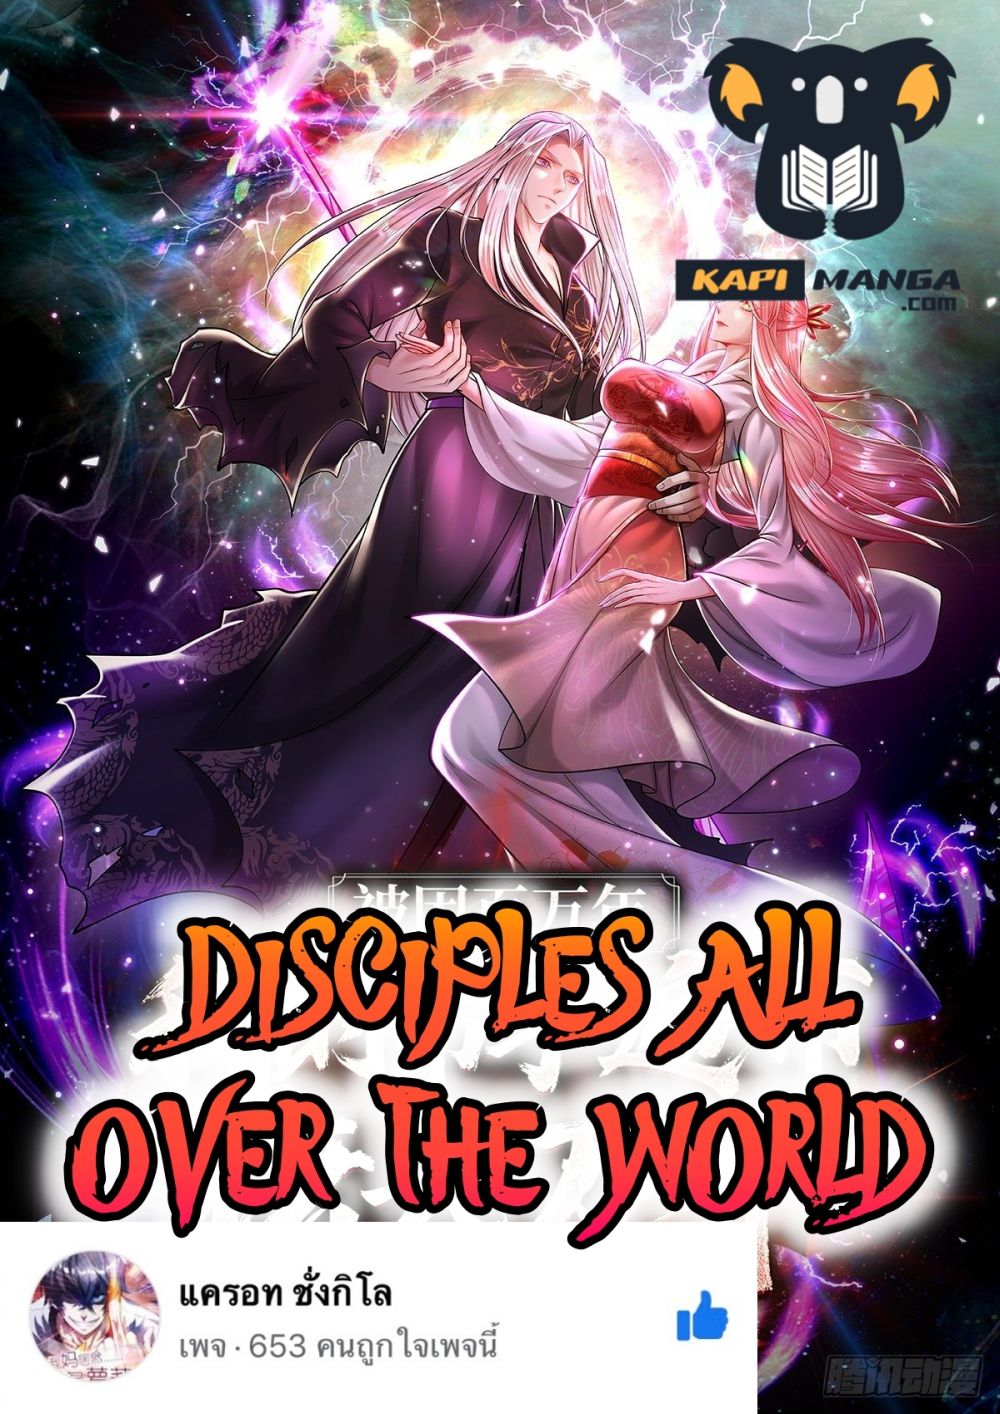 Disciples All Over the World à¸à¸­à¸à¸à¸µà¹ 56 (1)